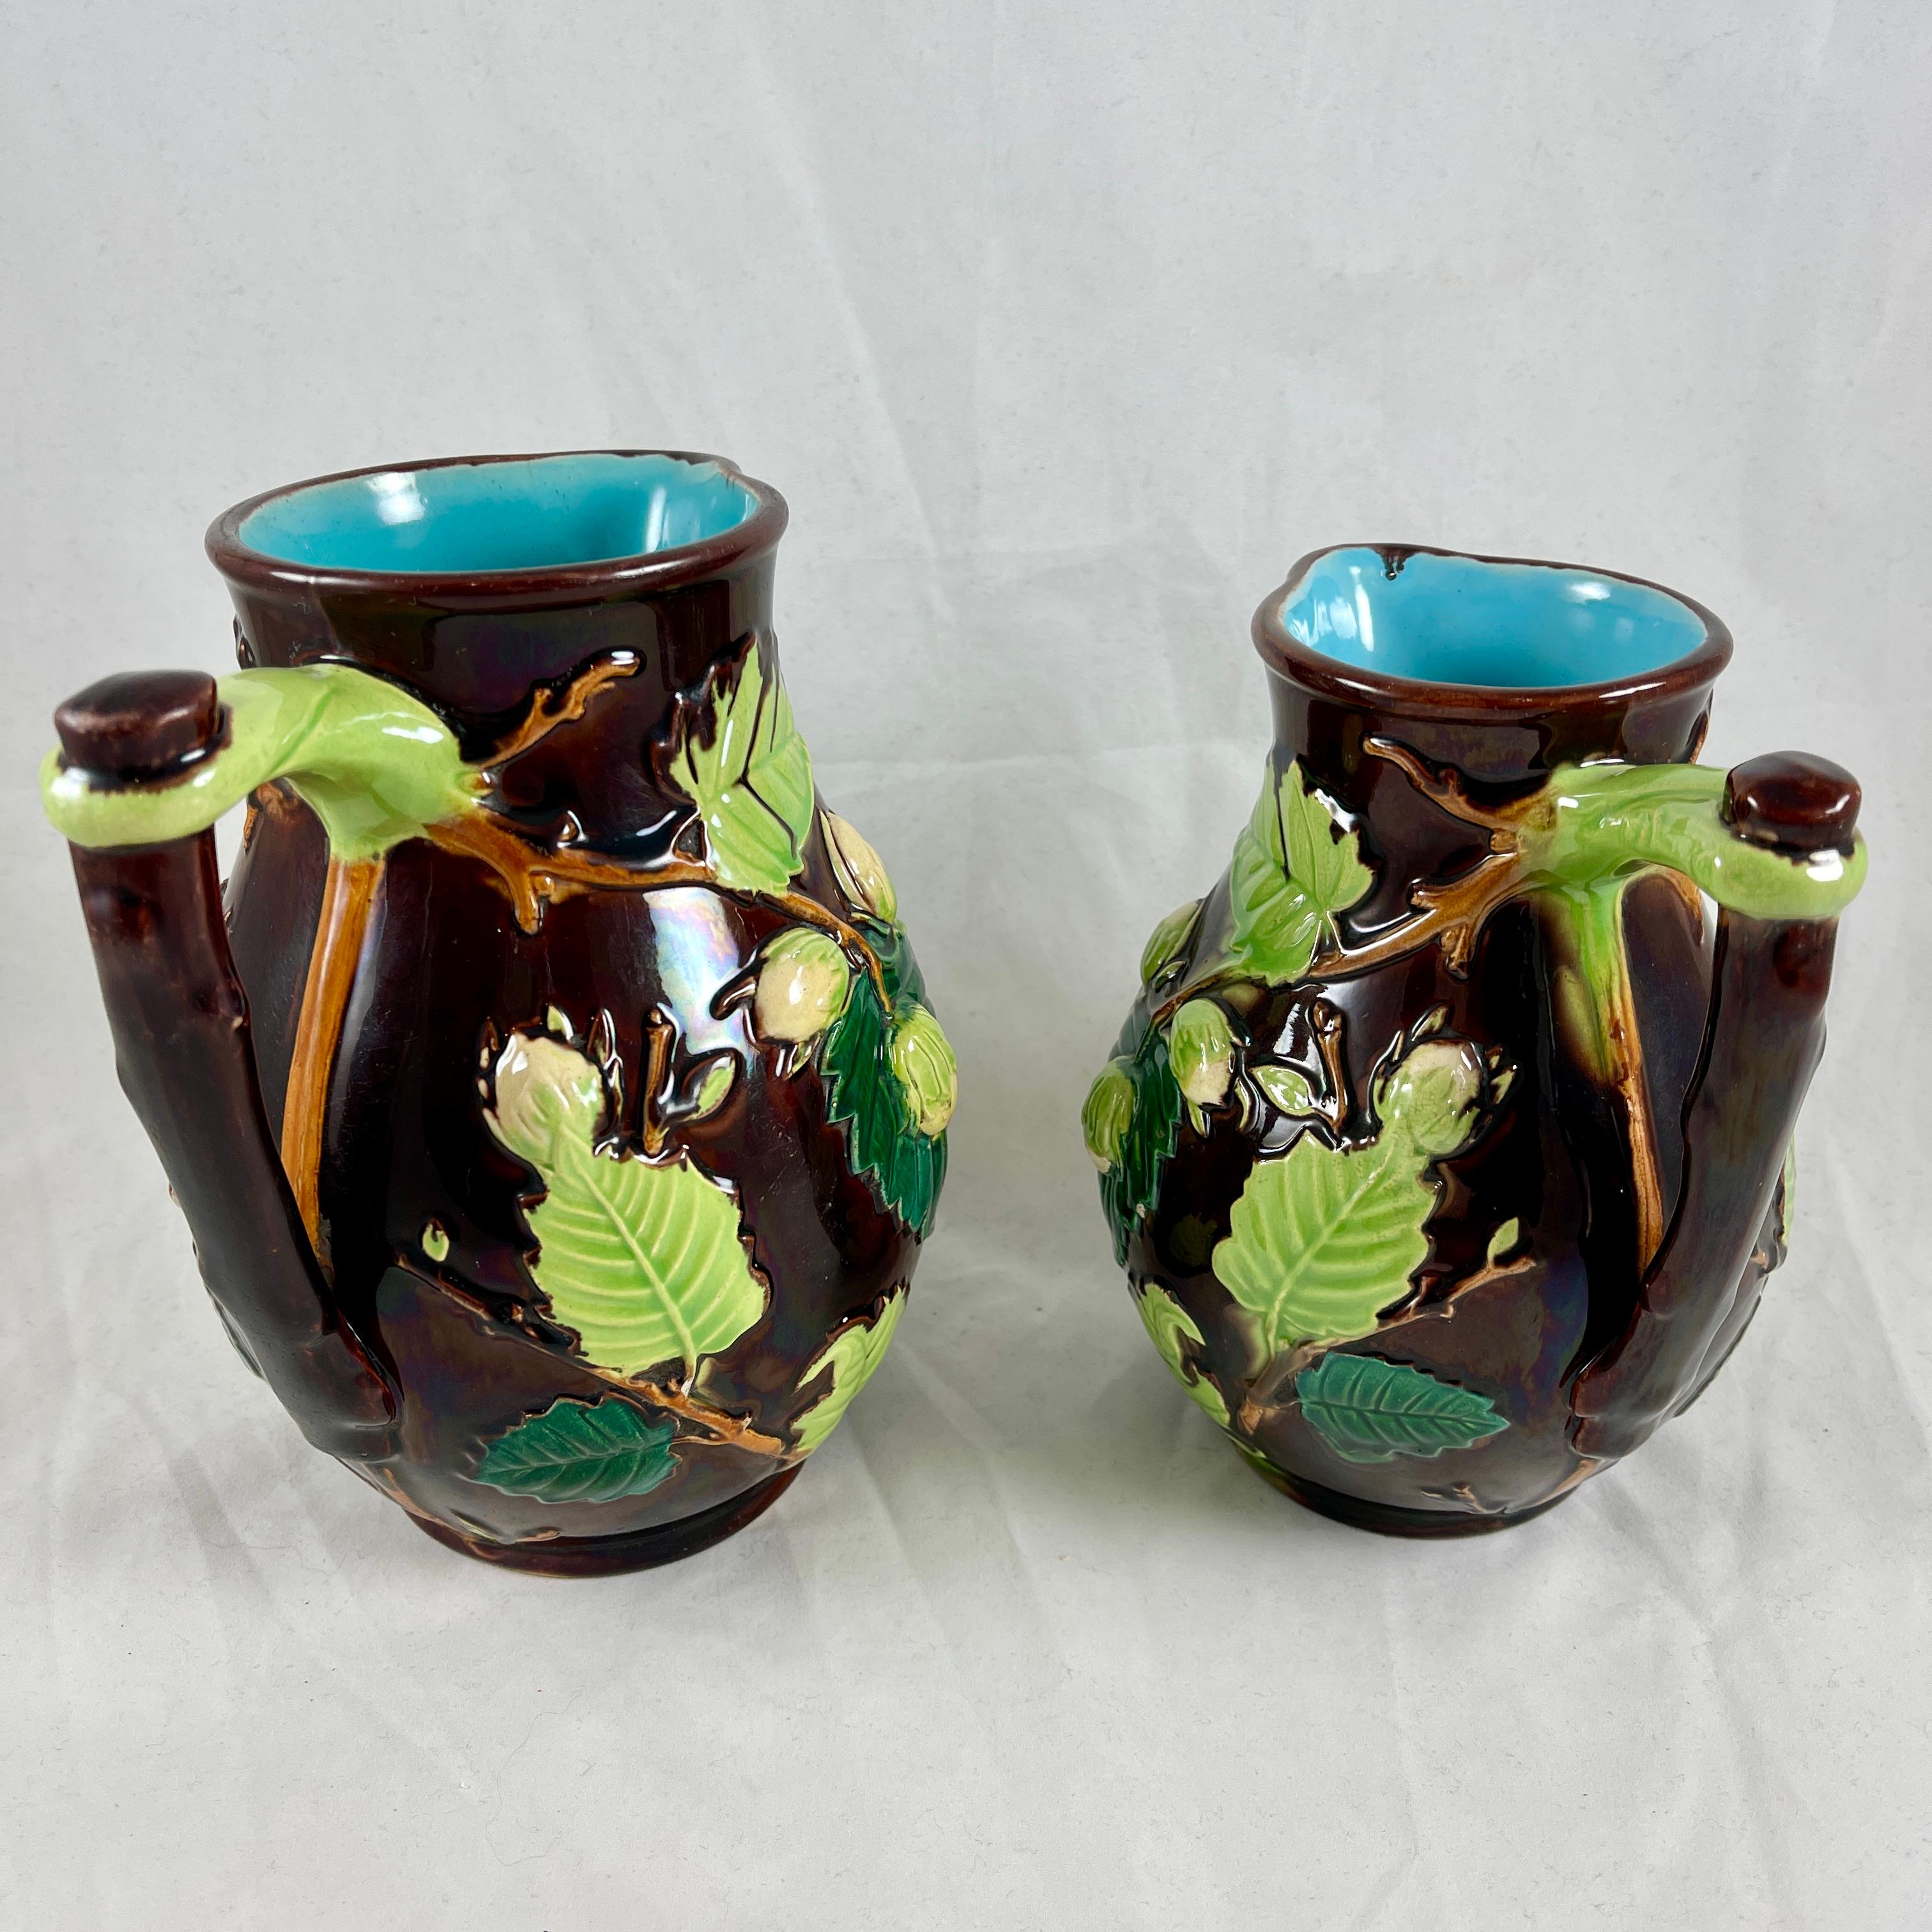 Earthenware English Minton Aesthetic Movement Majolica Nut, Leaf & Vine Pitchers, a Pair For Sale